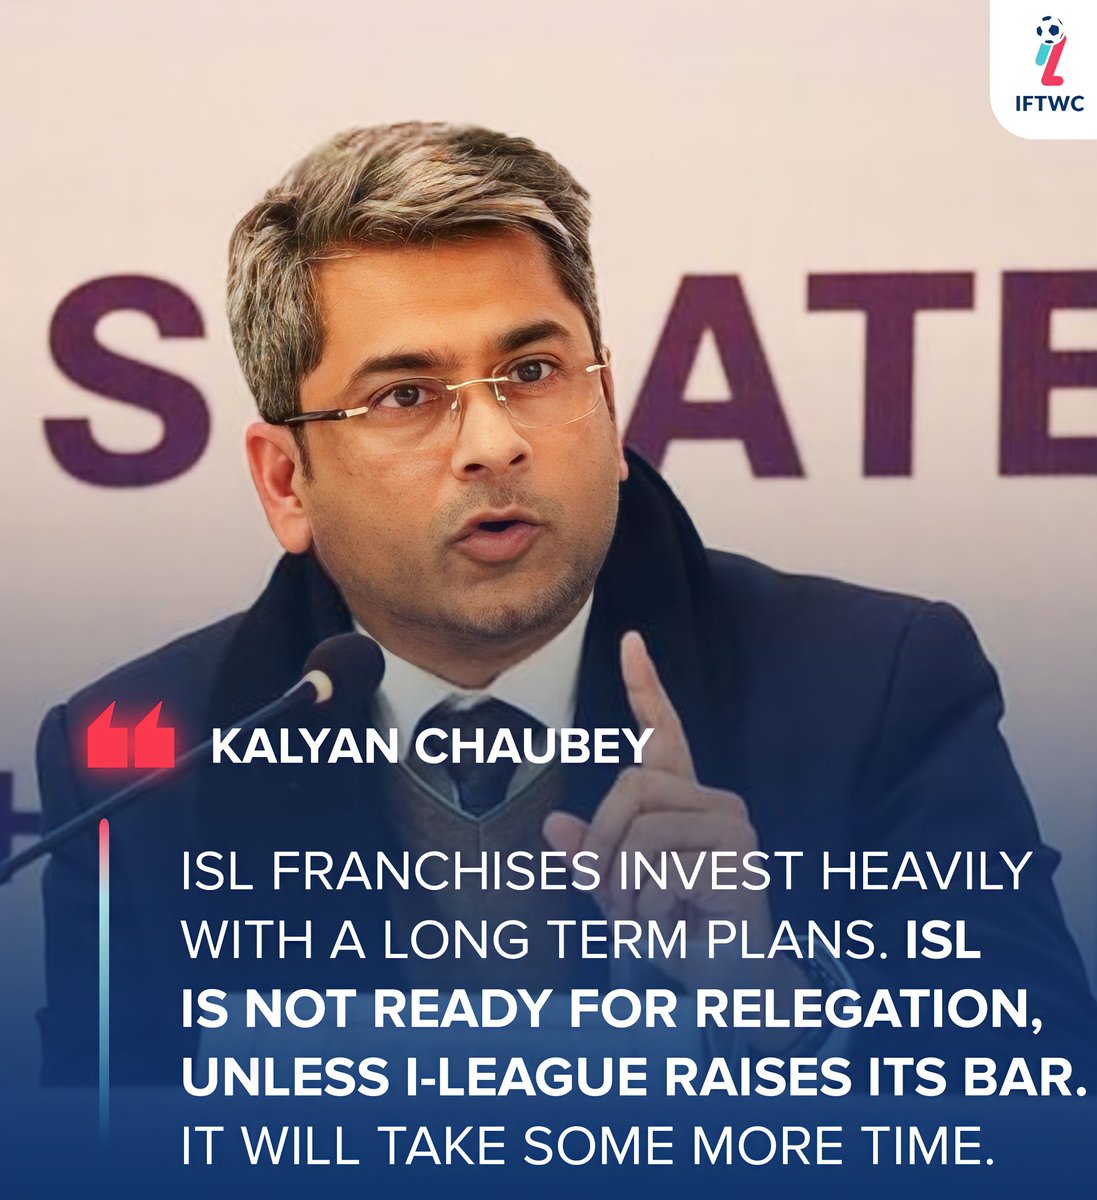 AIFF President Kalyan Chaubey declares that relegation from ISL will not start just yet. It is due to the massive gap in between these two leagues, it might force the #ISL clubs to lose motivation and not continue later in I-League!